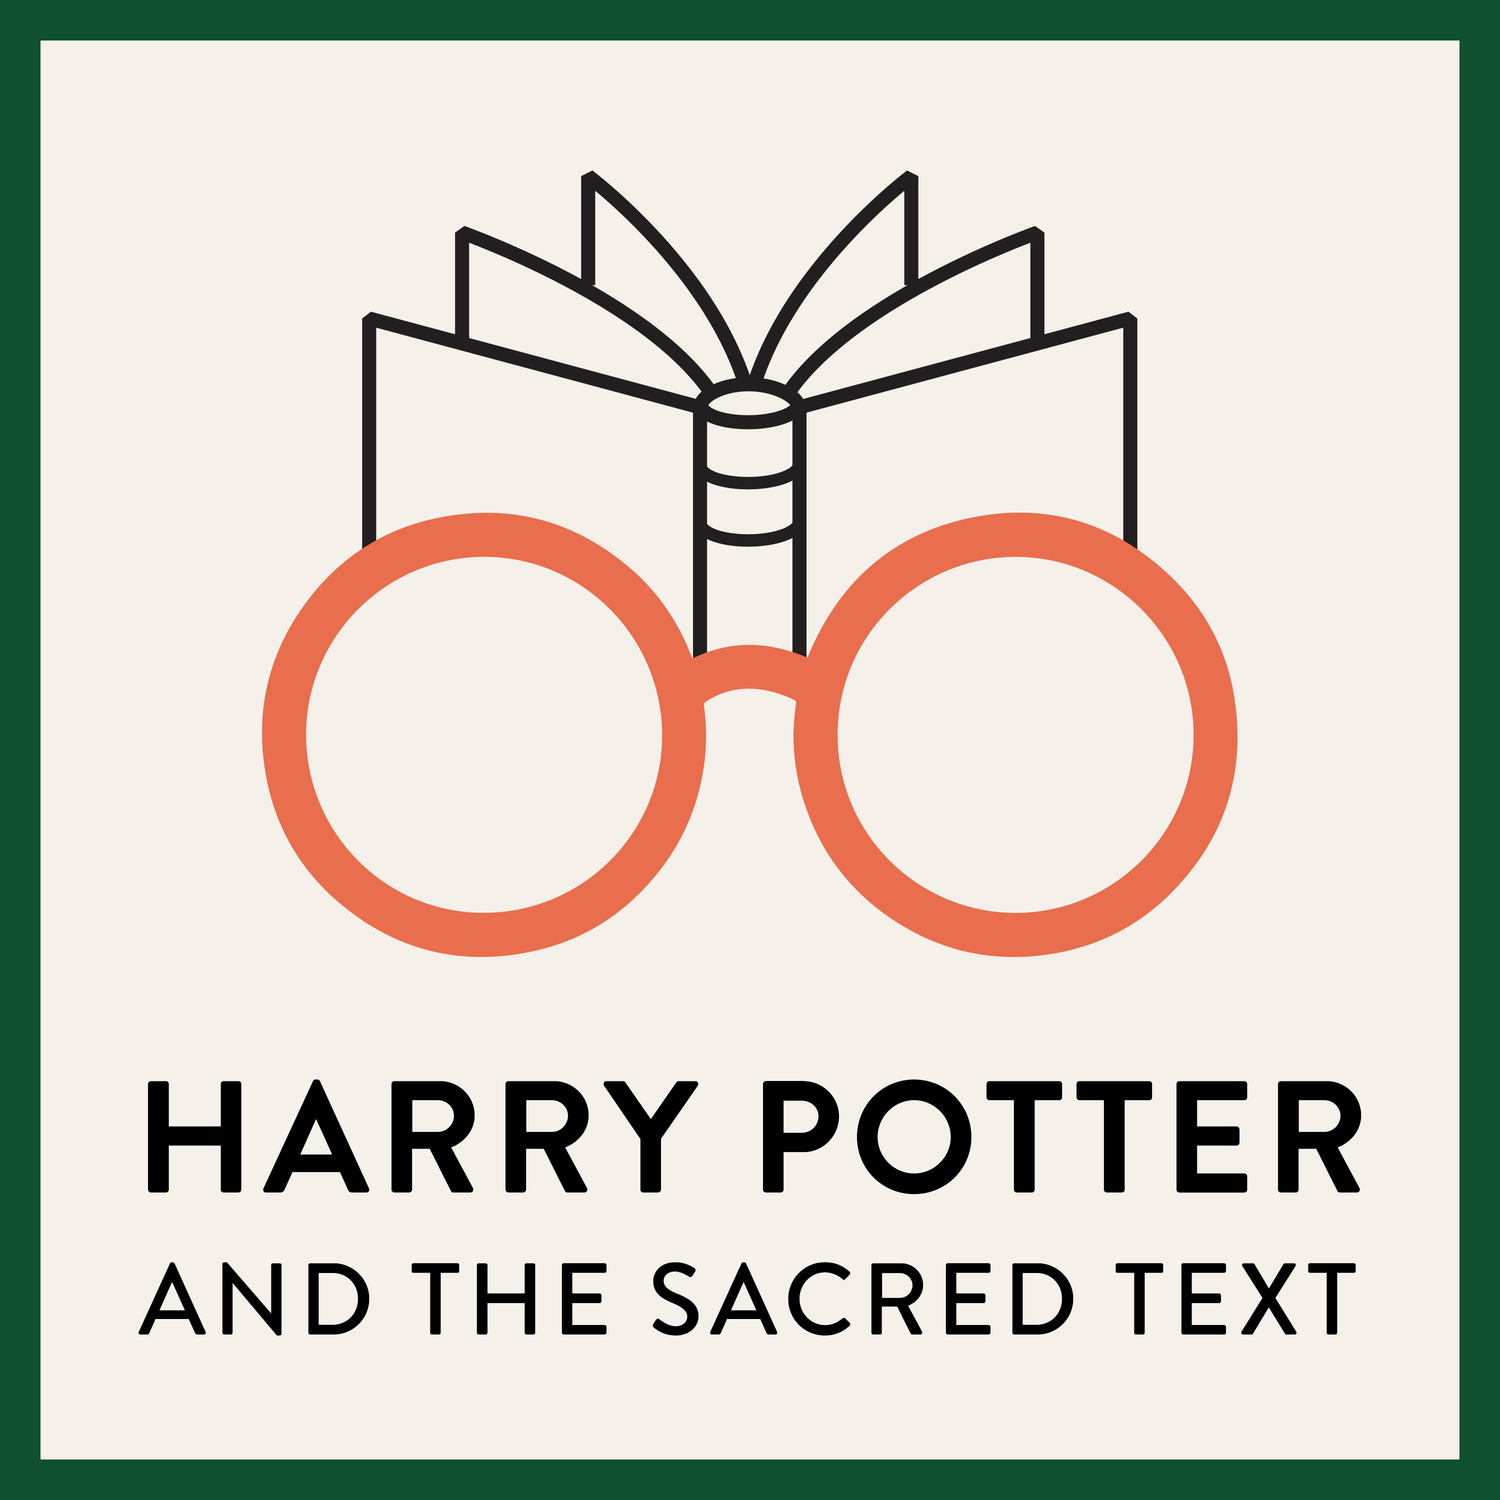 The logo for Harry Potter and the Sacred Text